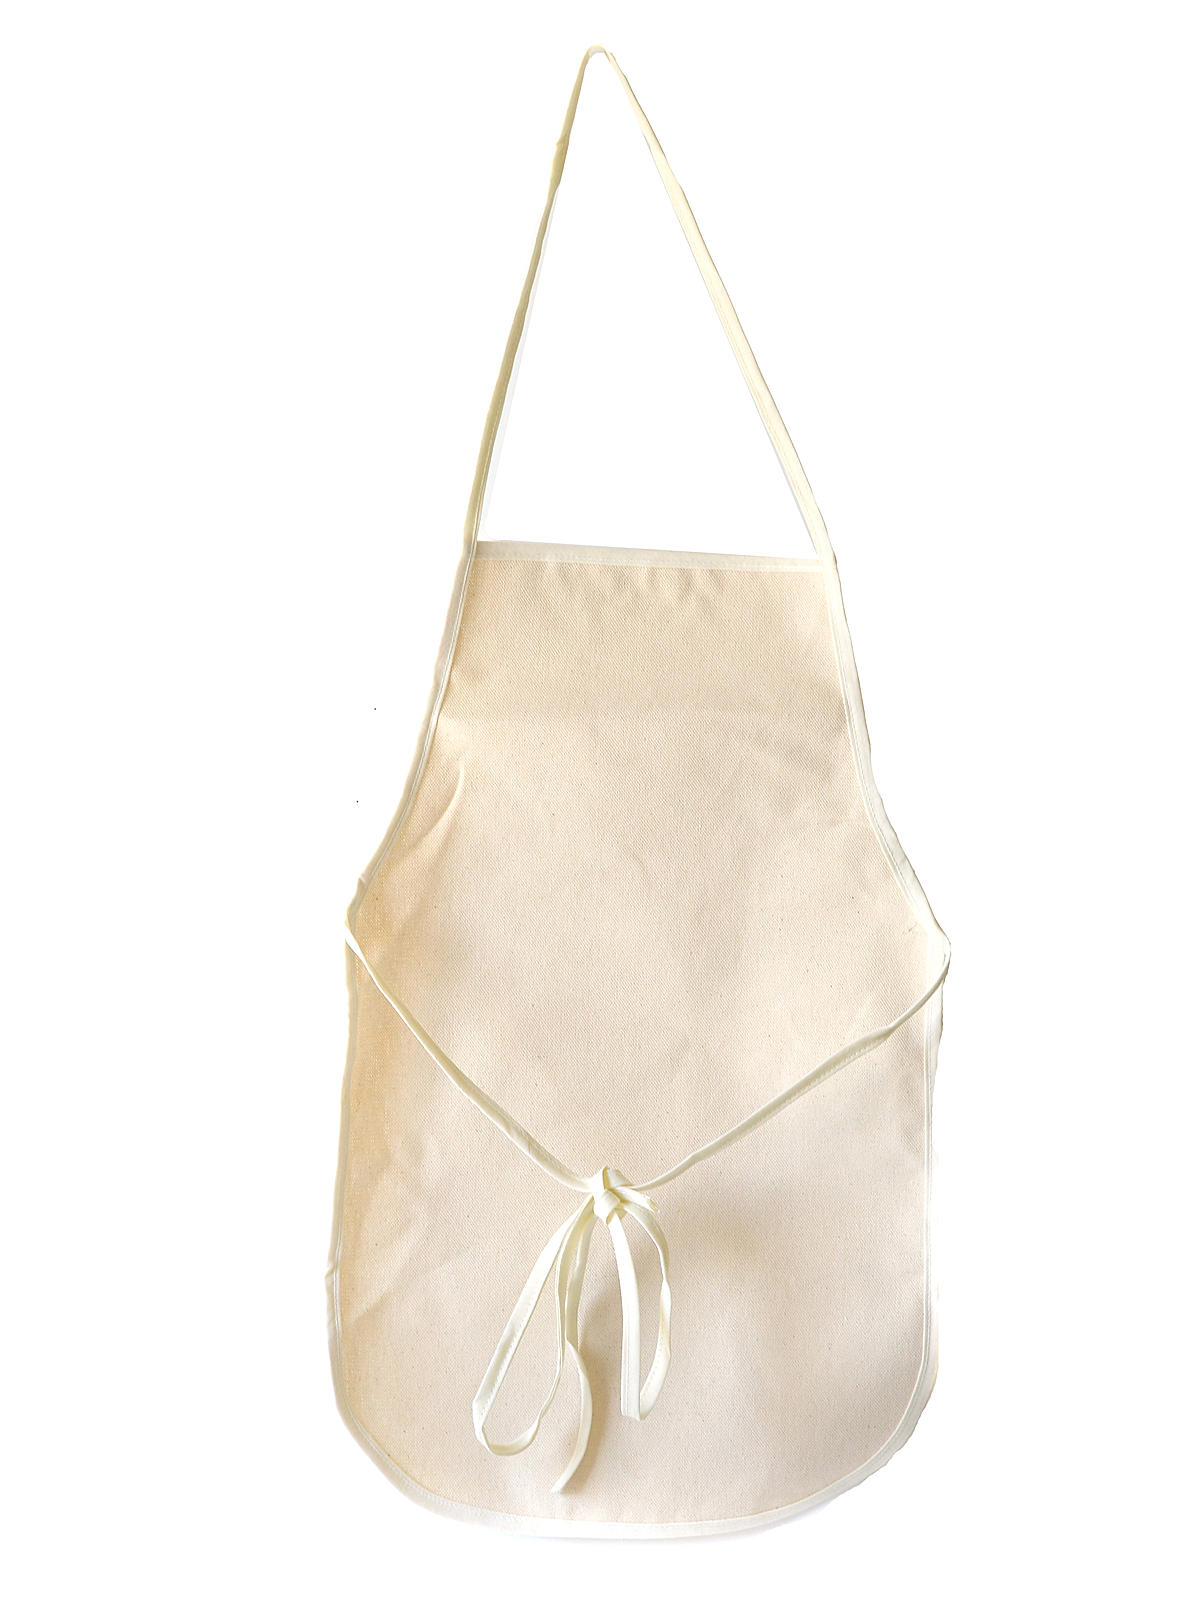 Children's Aprons Without Pockets 12 In. X 19 In. Natural